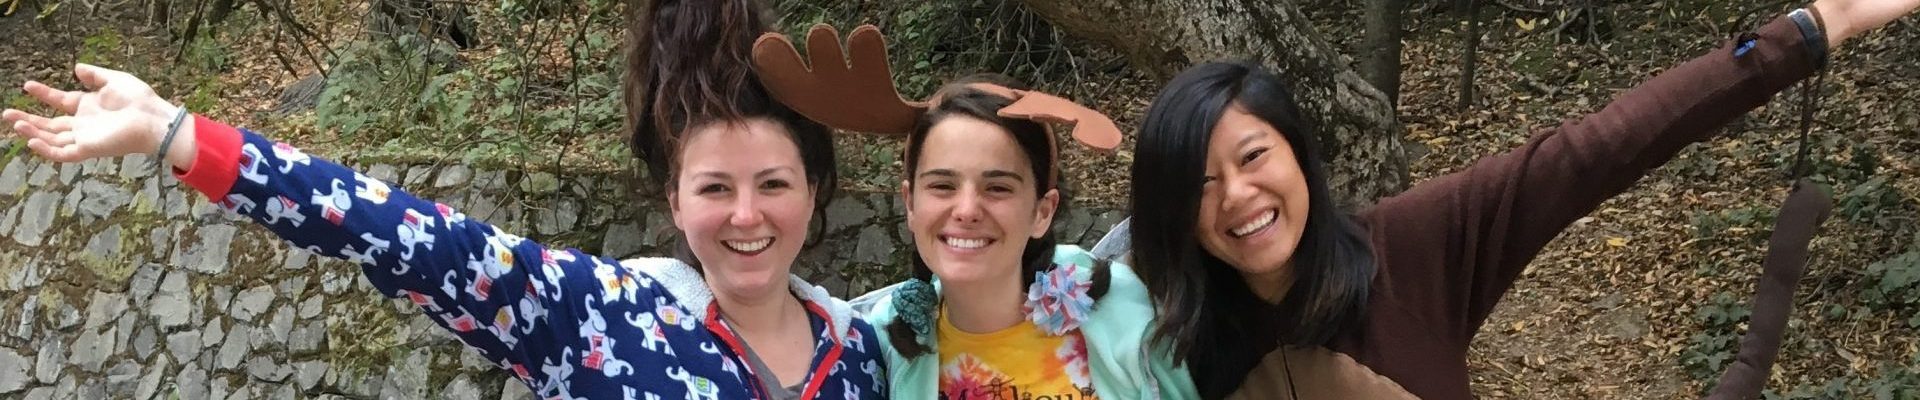 Smiling counselors dress in pajamas for Wacky Wednesday at Tilden Outdoor Camp in Berkeley